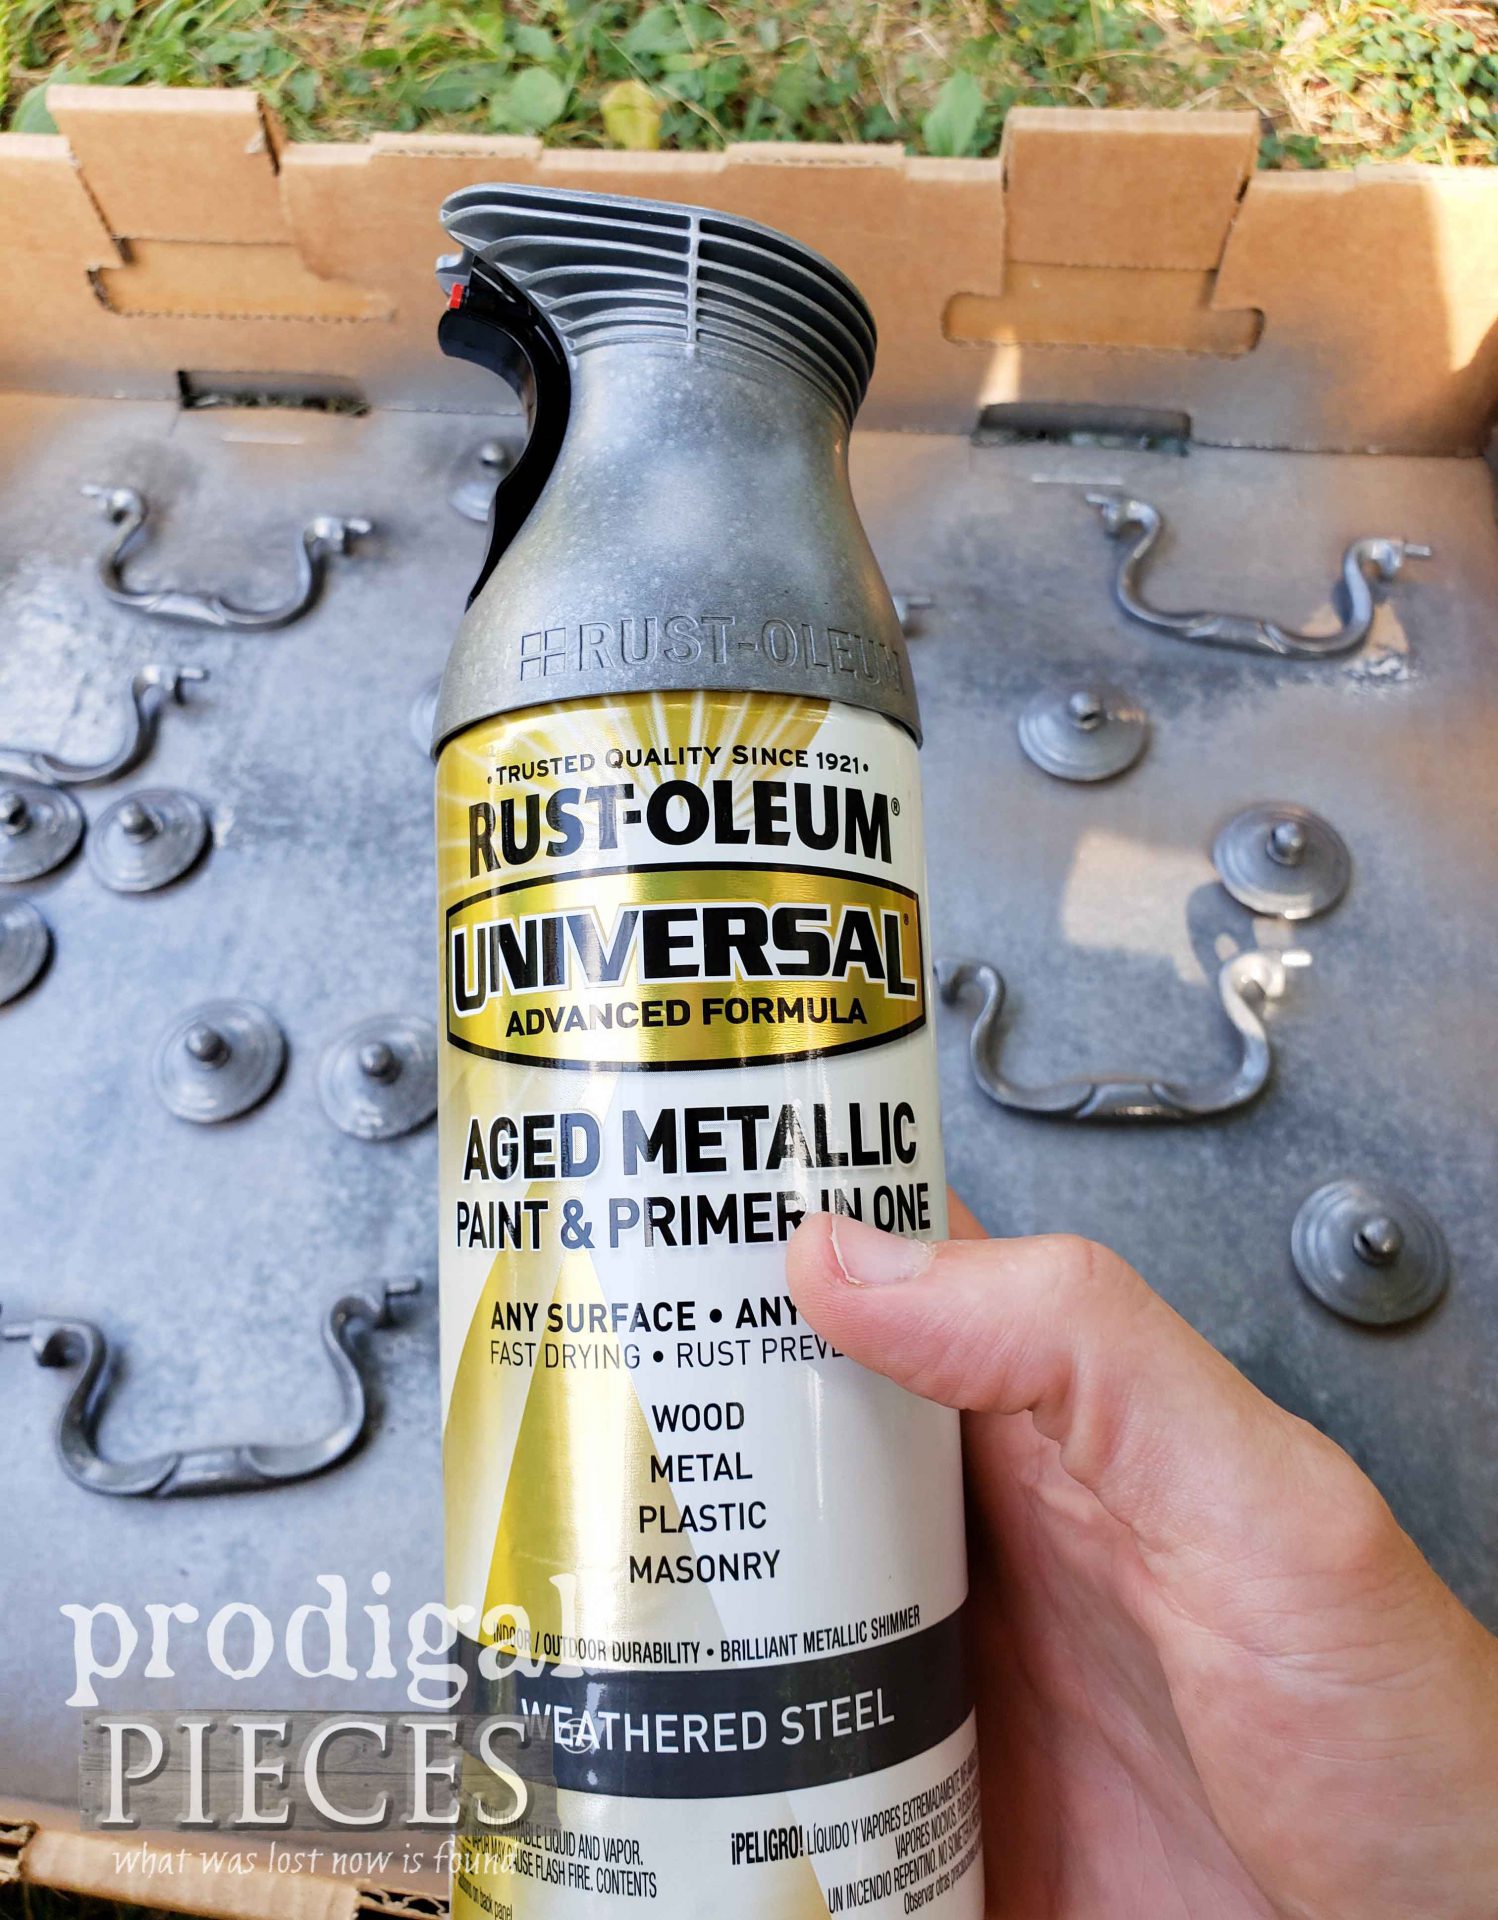 Weathered Steel Aged Metallic Paint by Rustoleum | prodigalpieces.com